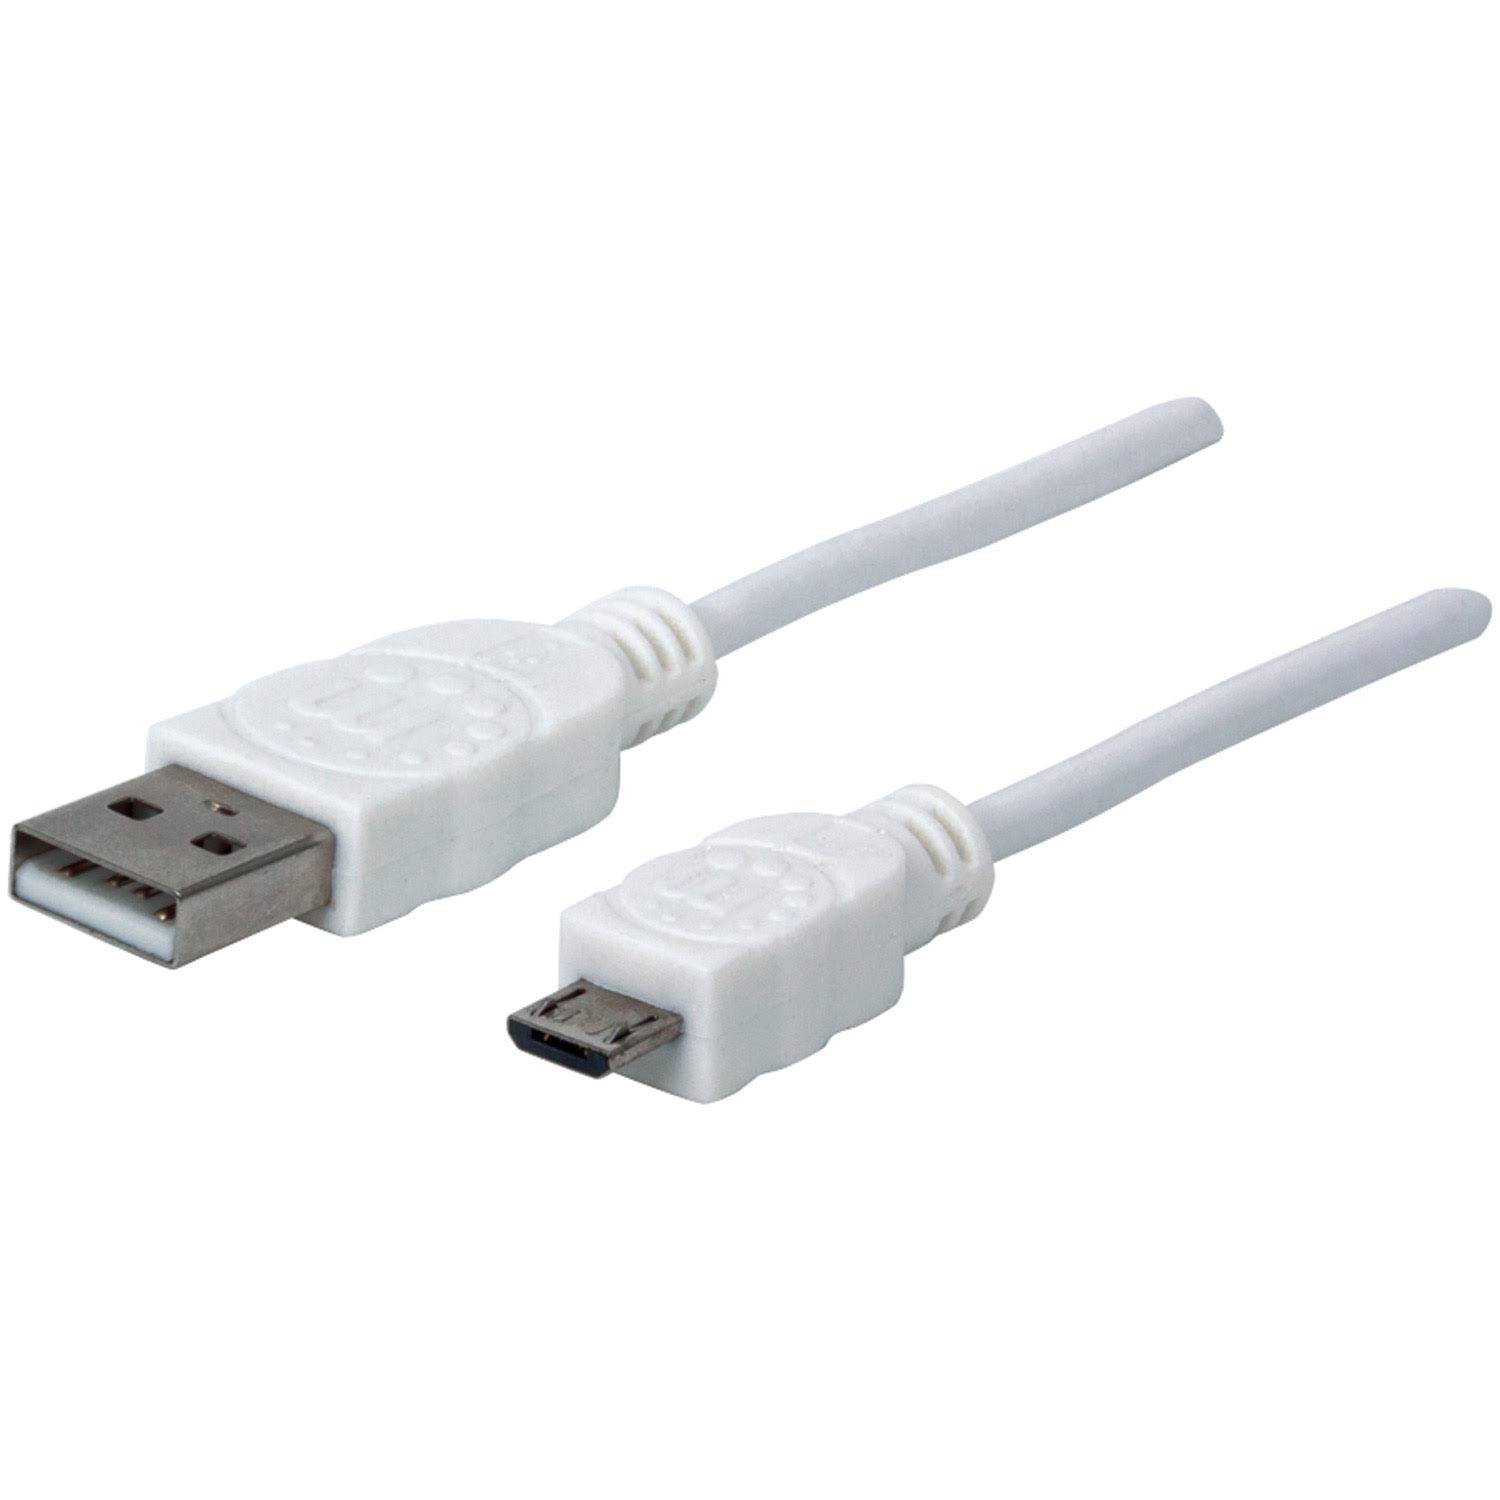 Manhattan 323987 High-Speed USB Device Cable - White, 3'